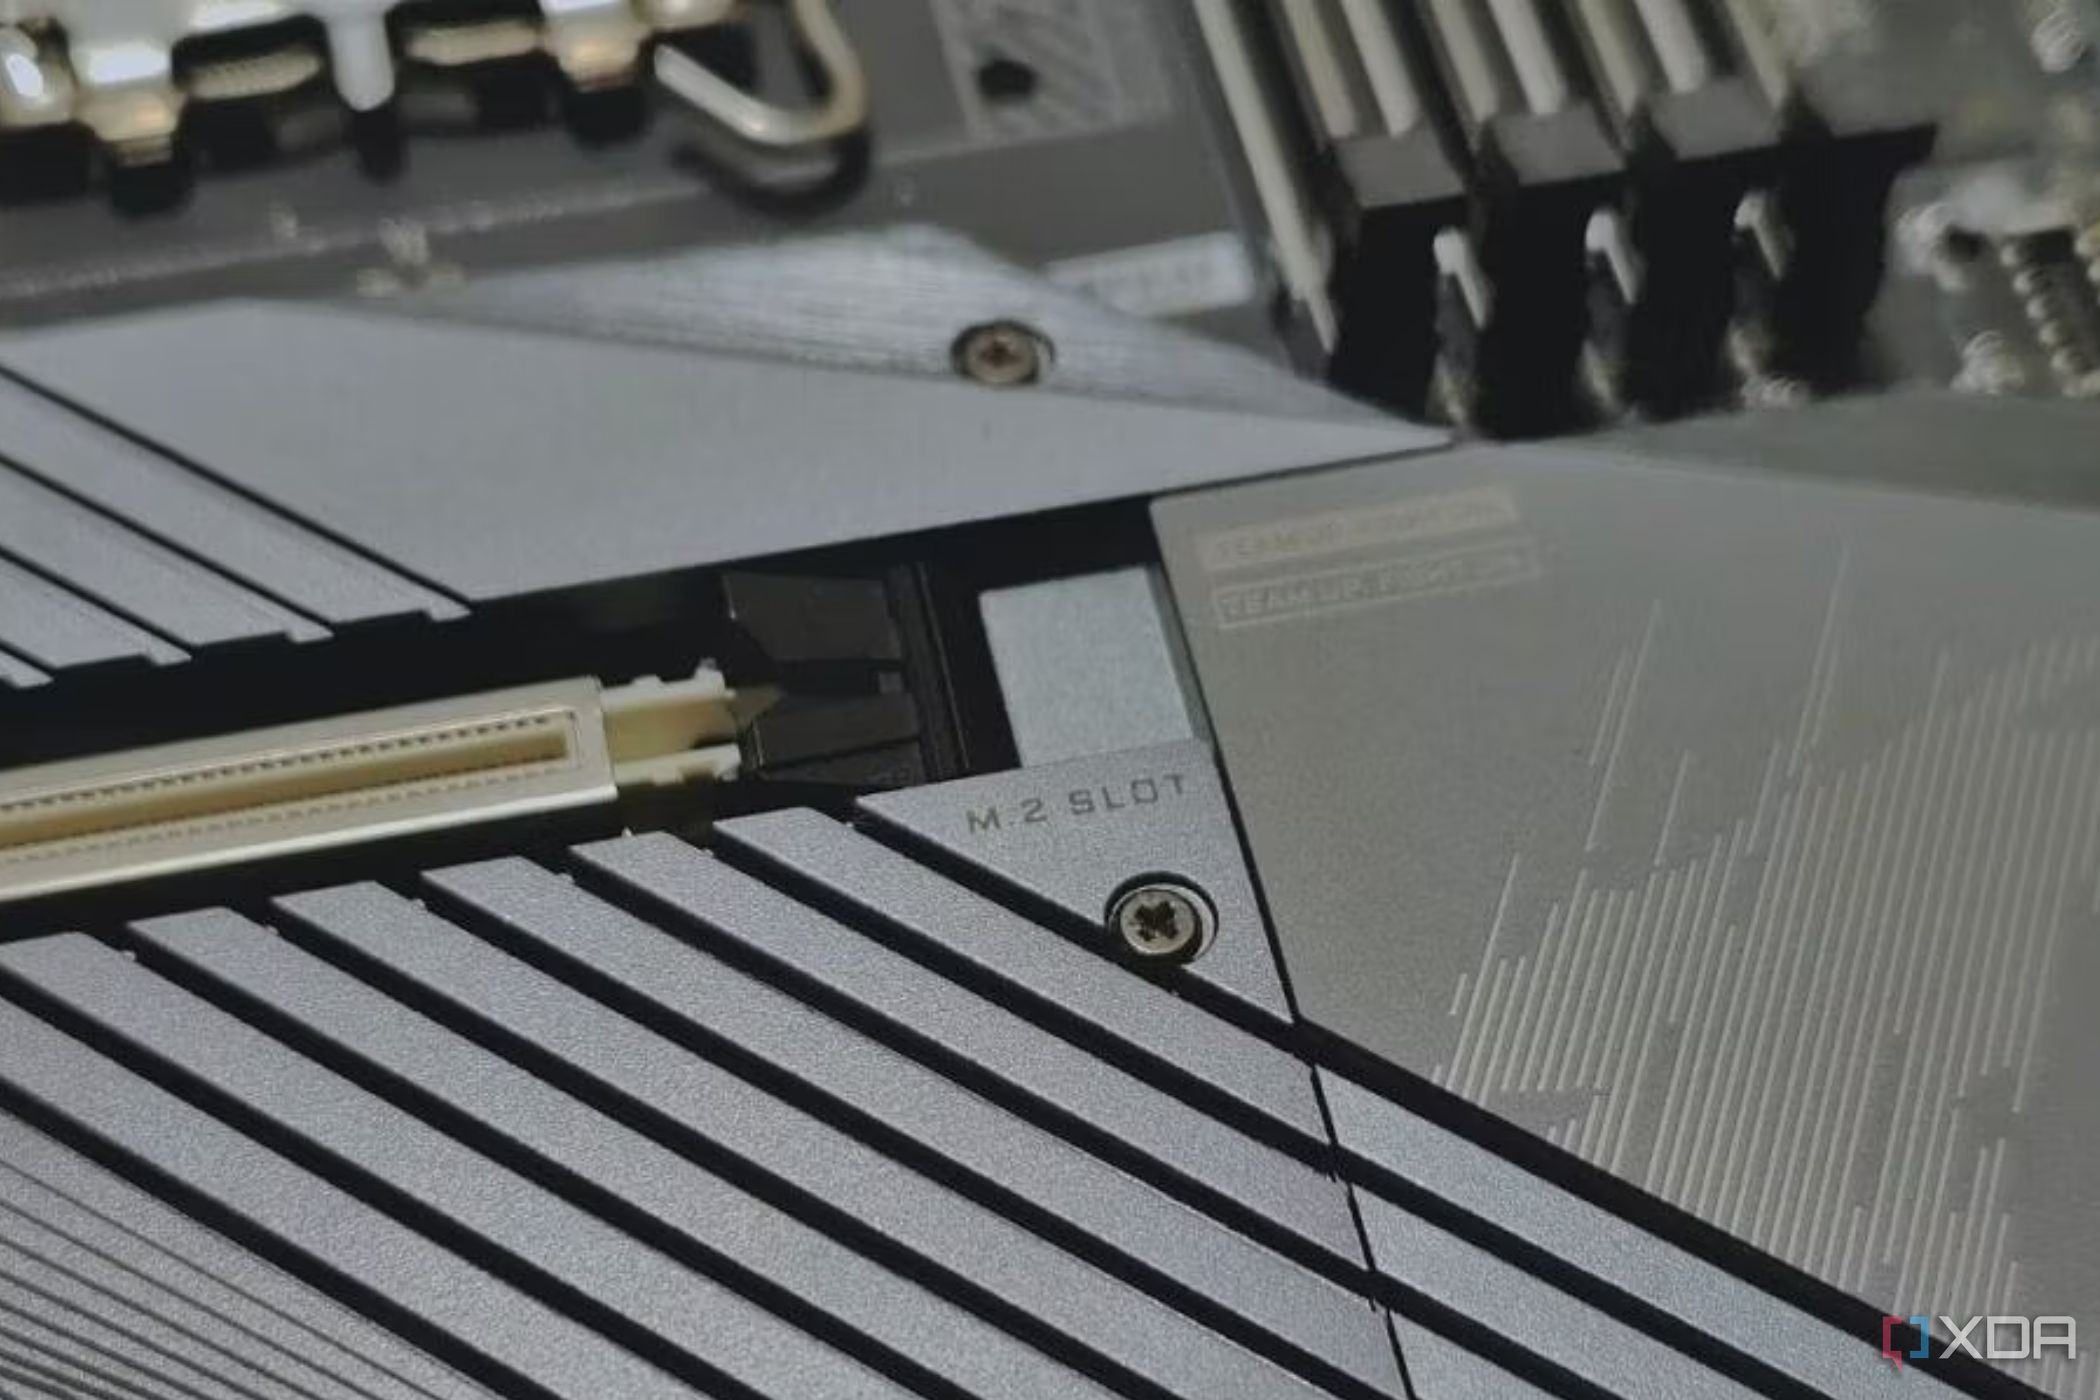 An image showing an M.2 slot on a motherboard.